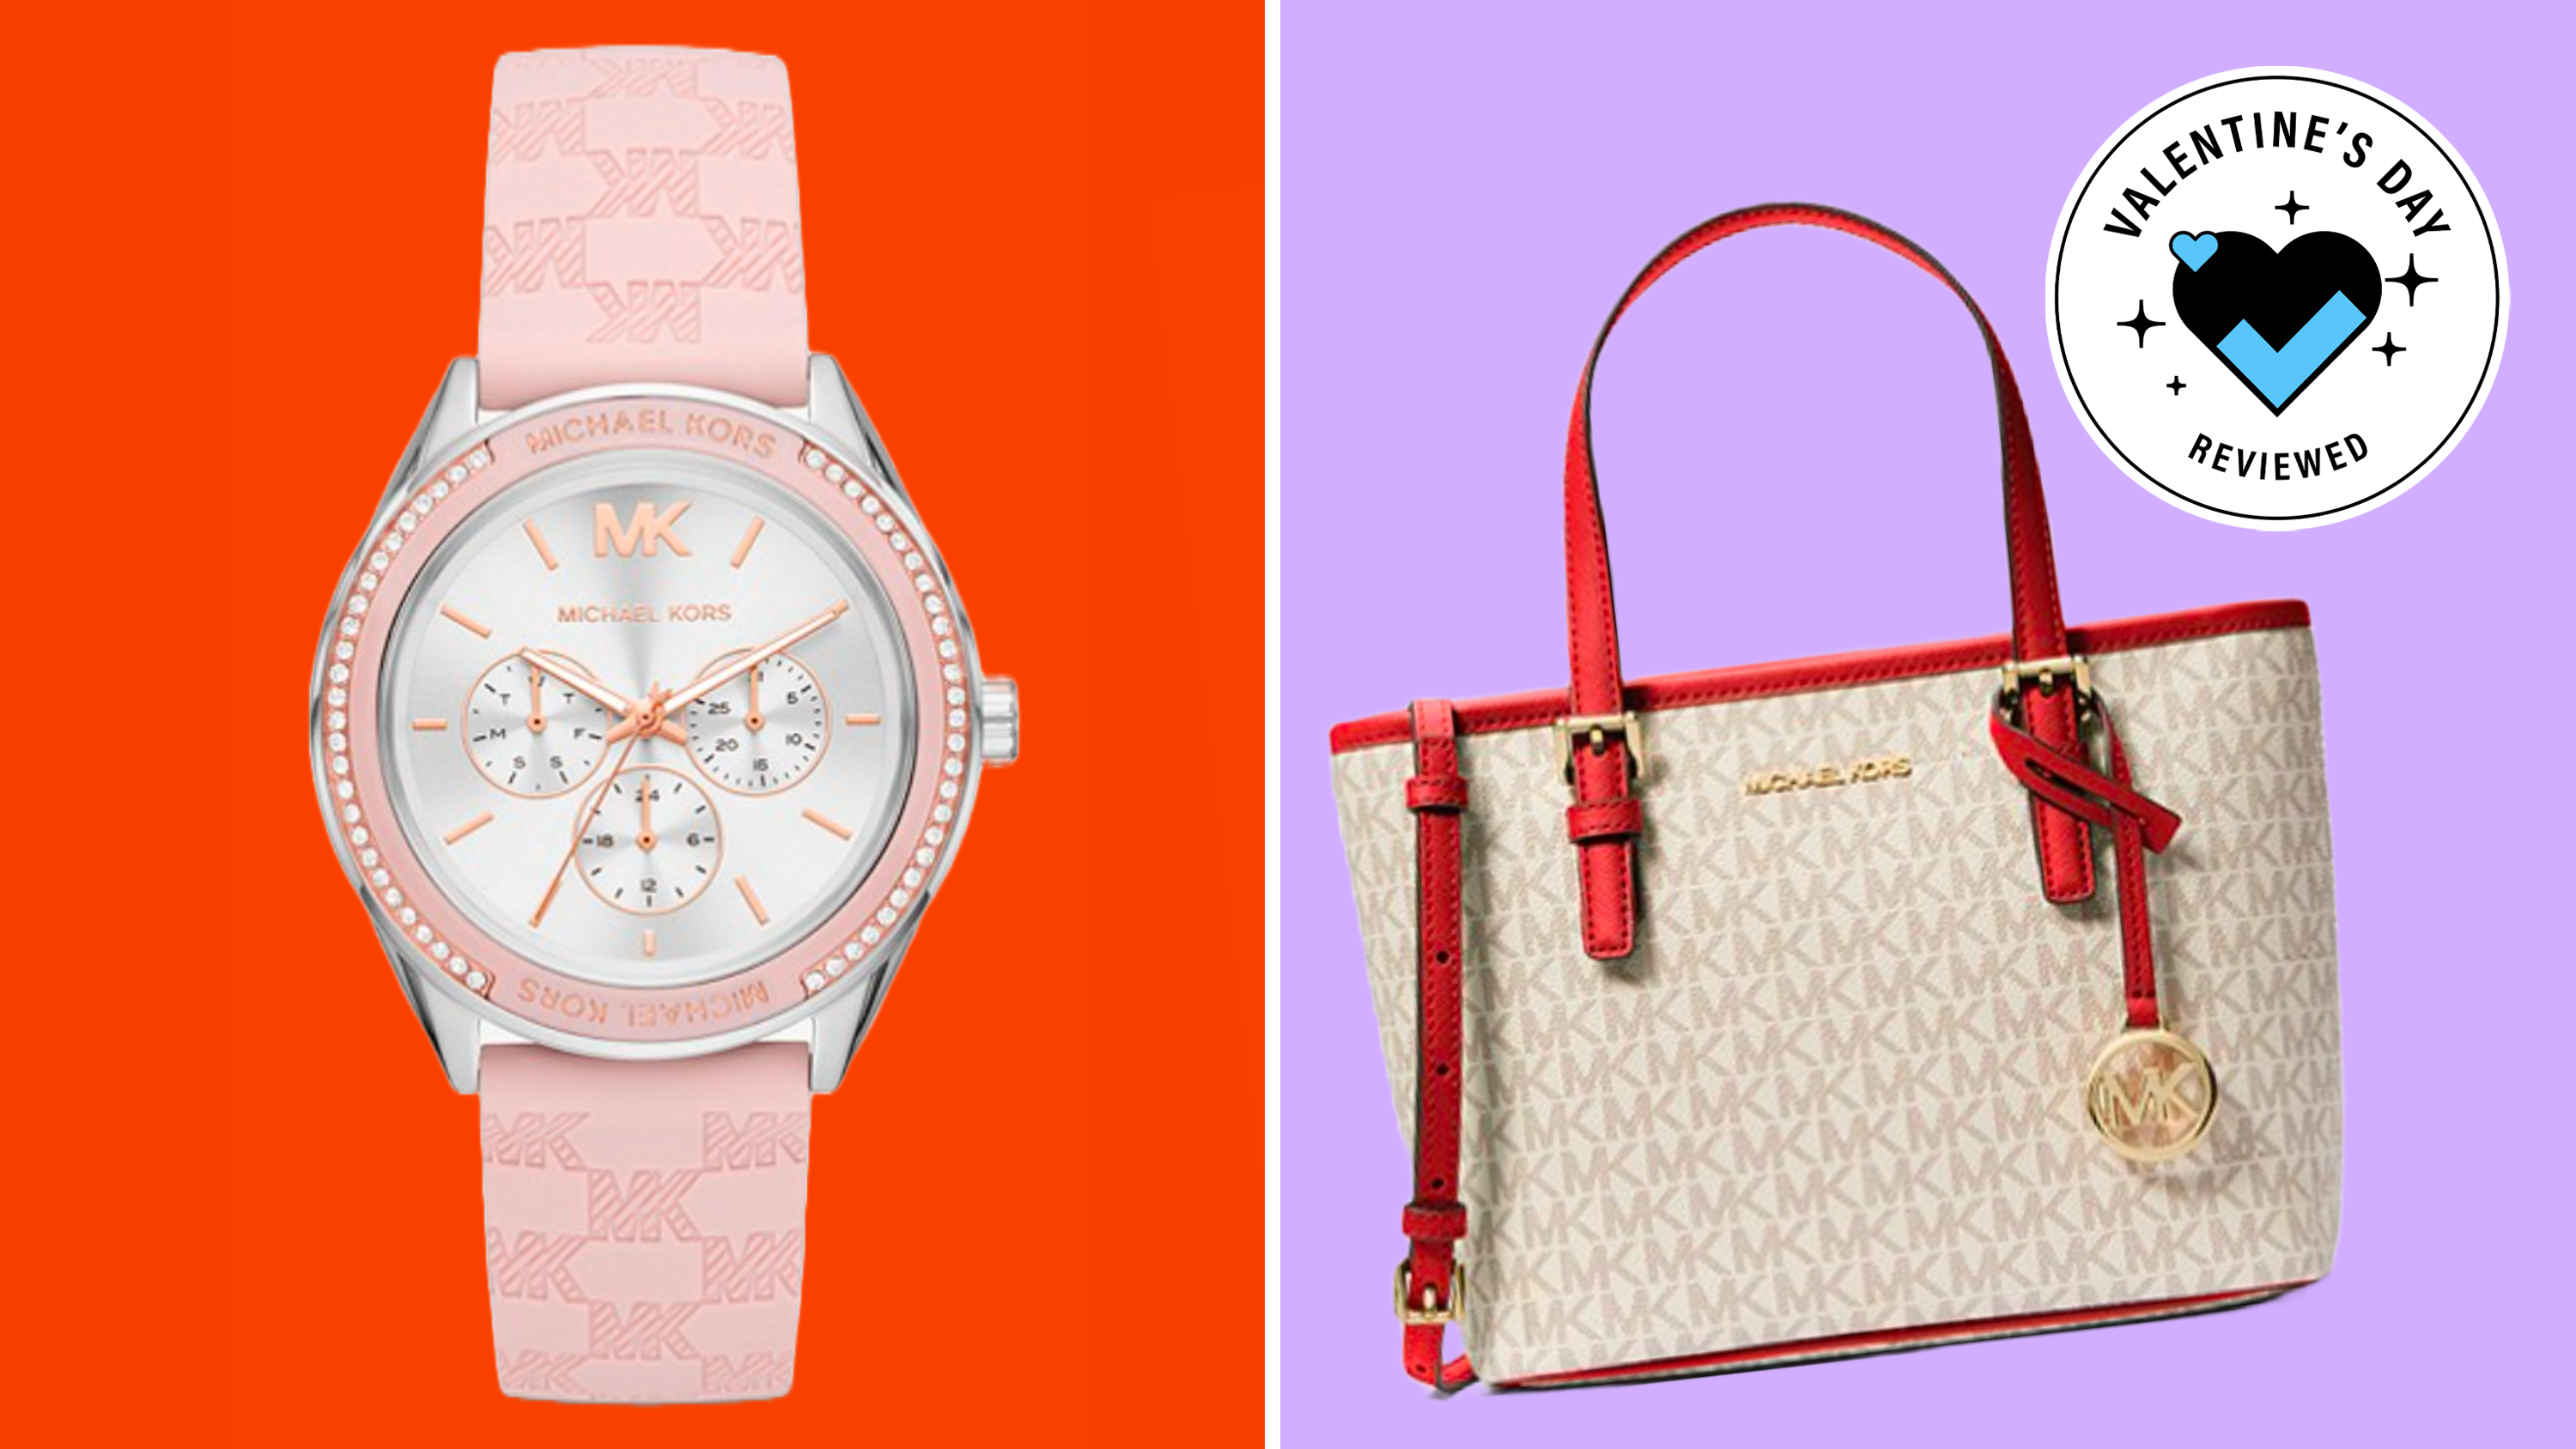 Michael Kors sale: Save an extra 15% on purses for Valentine's Day